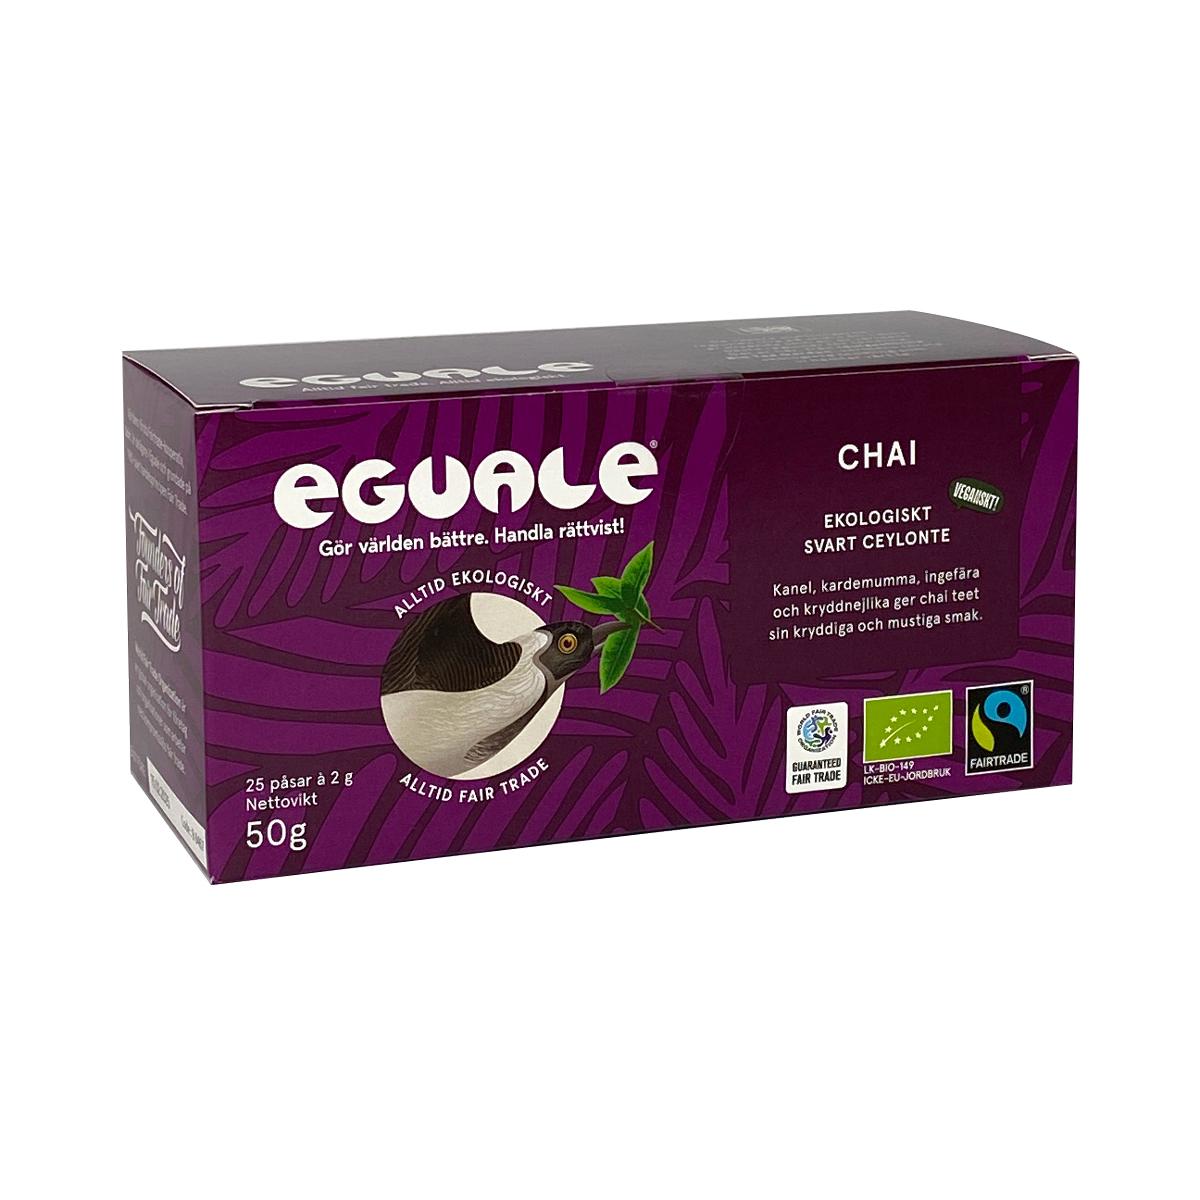 Eguale's Eguale Chai '